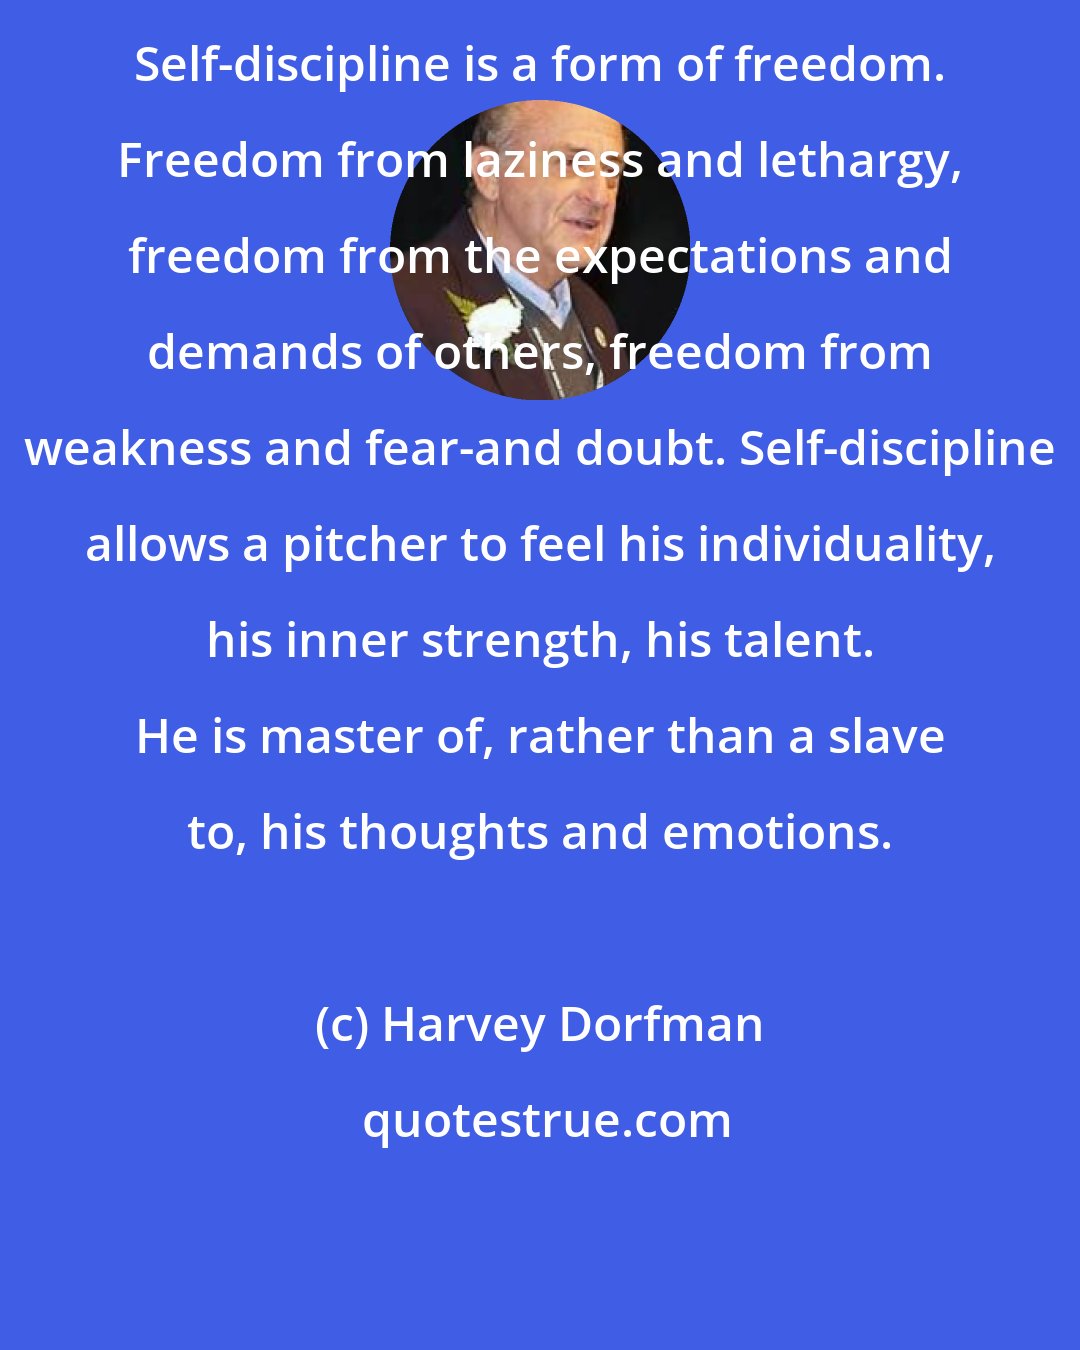 Harvey Dorfman: Self-discipline is a form of freedom. Freedom from laziness and lethargy, freedom from the expectations and demands of others, freedom from weakness and fear-and doubt. Self-discipline allows a pitcher to feel his individuality, his inner strength, his talent. He is master of, rather than a slave to, his thoughts and emotions.